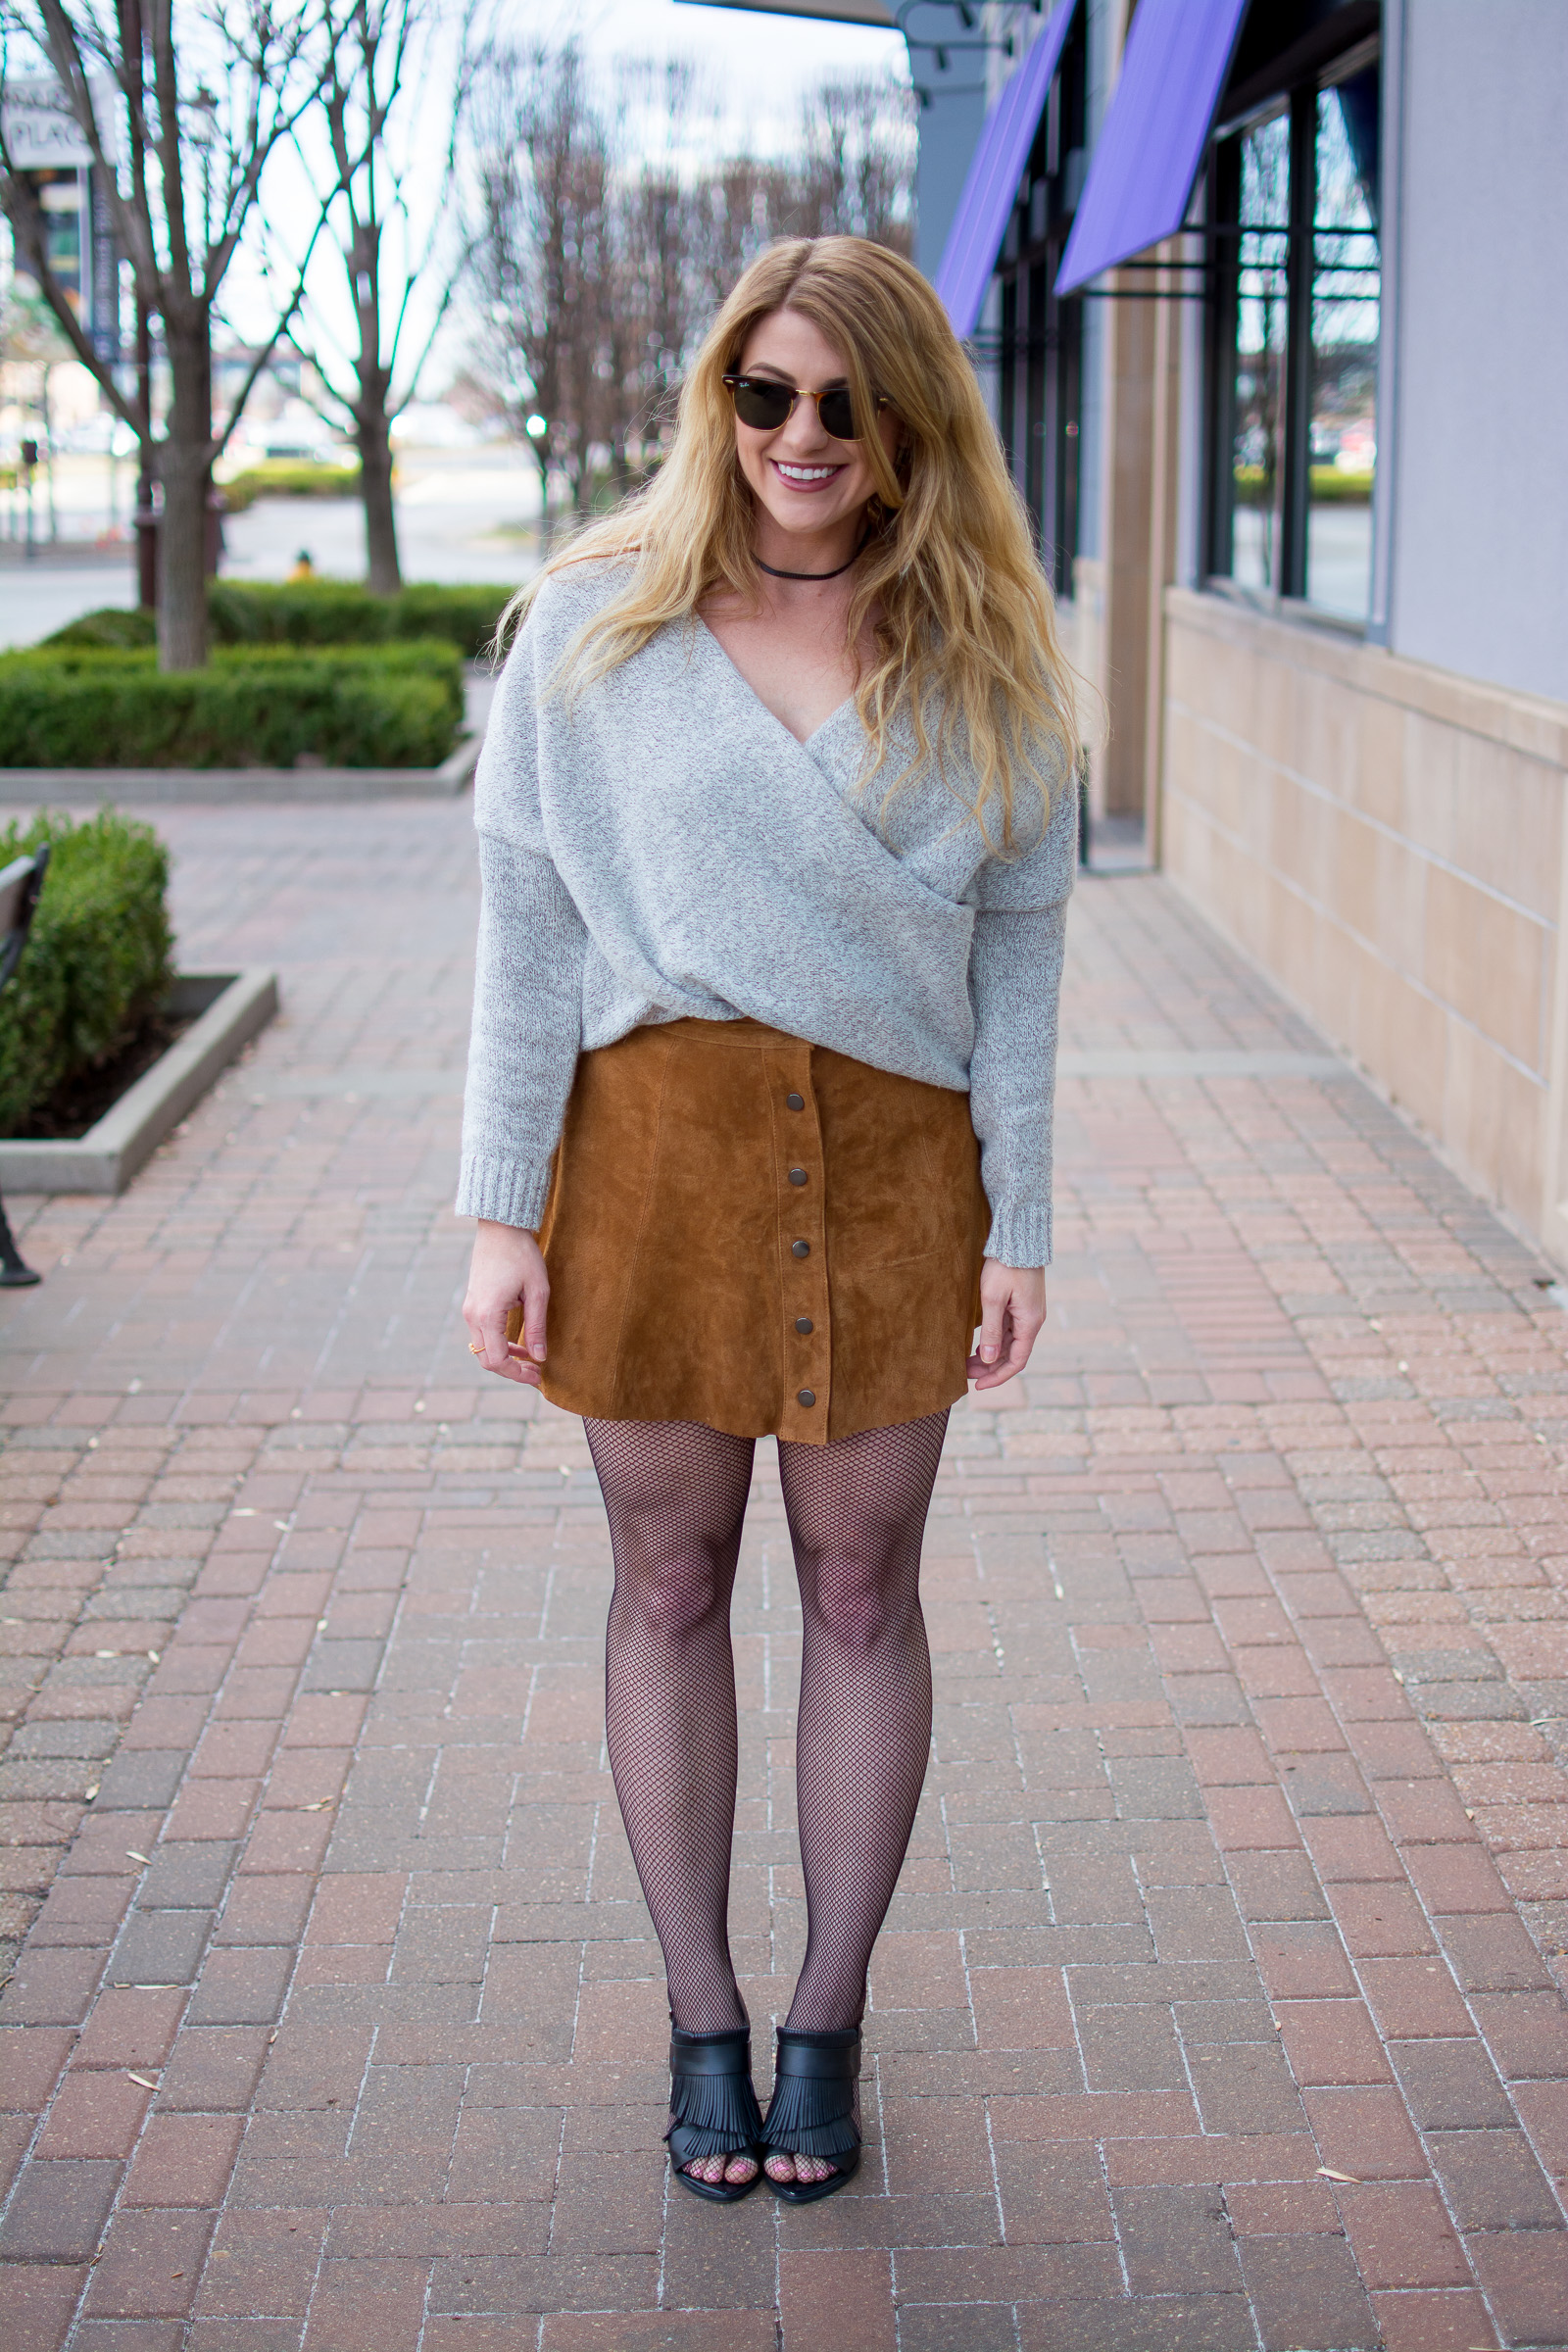 Suede Skirt + Criss Cross Sweater. | Le Stylo Rouge